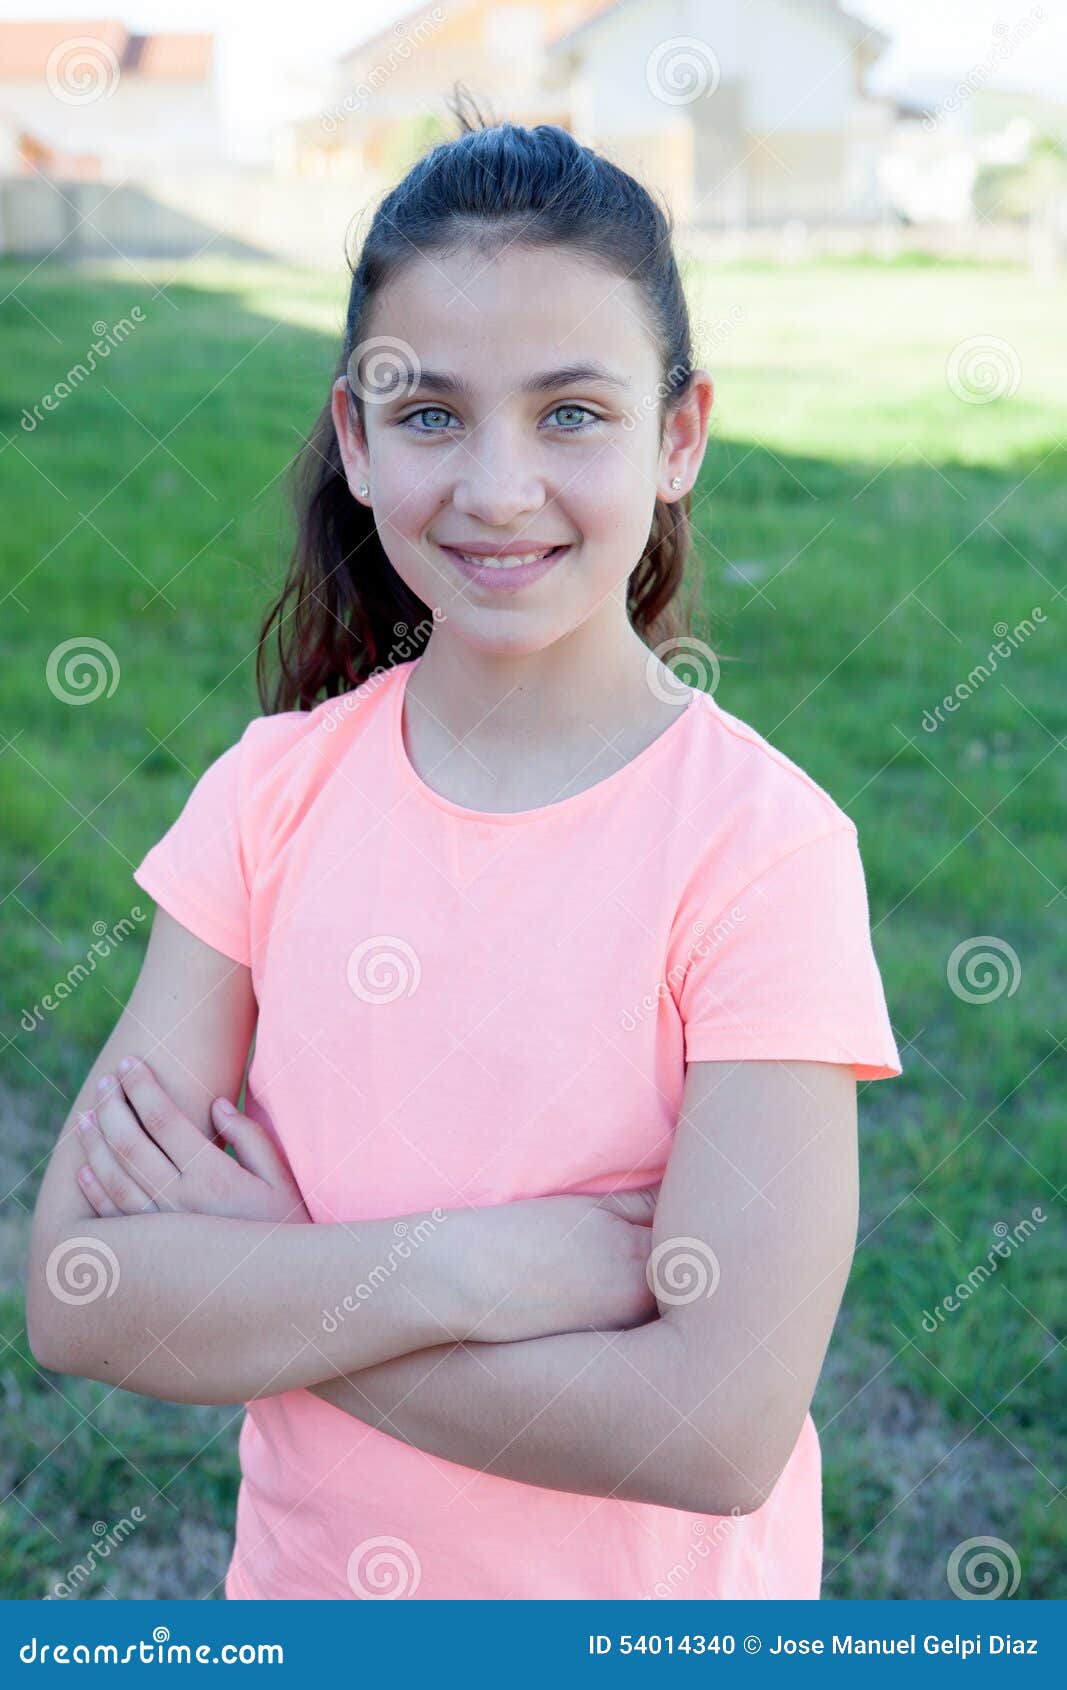 Happy Preteen Girl with Blue Eyes Smiling Stock Photo - Image of close ...